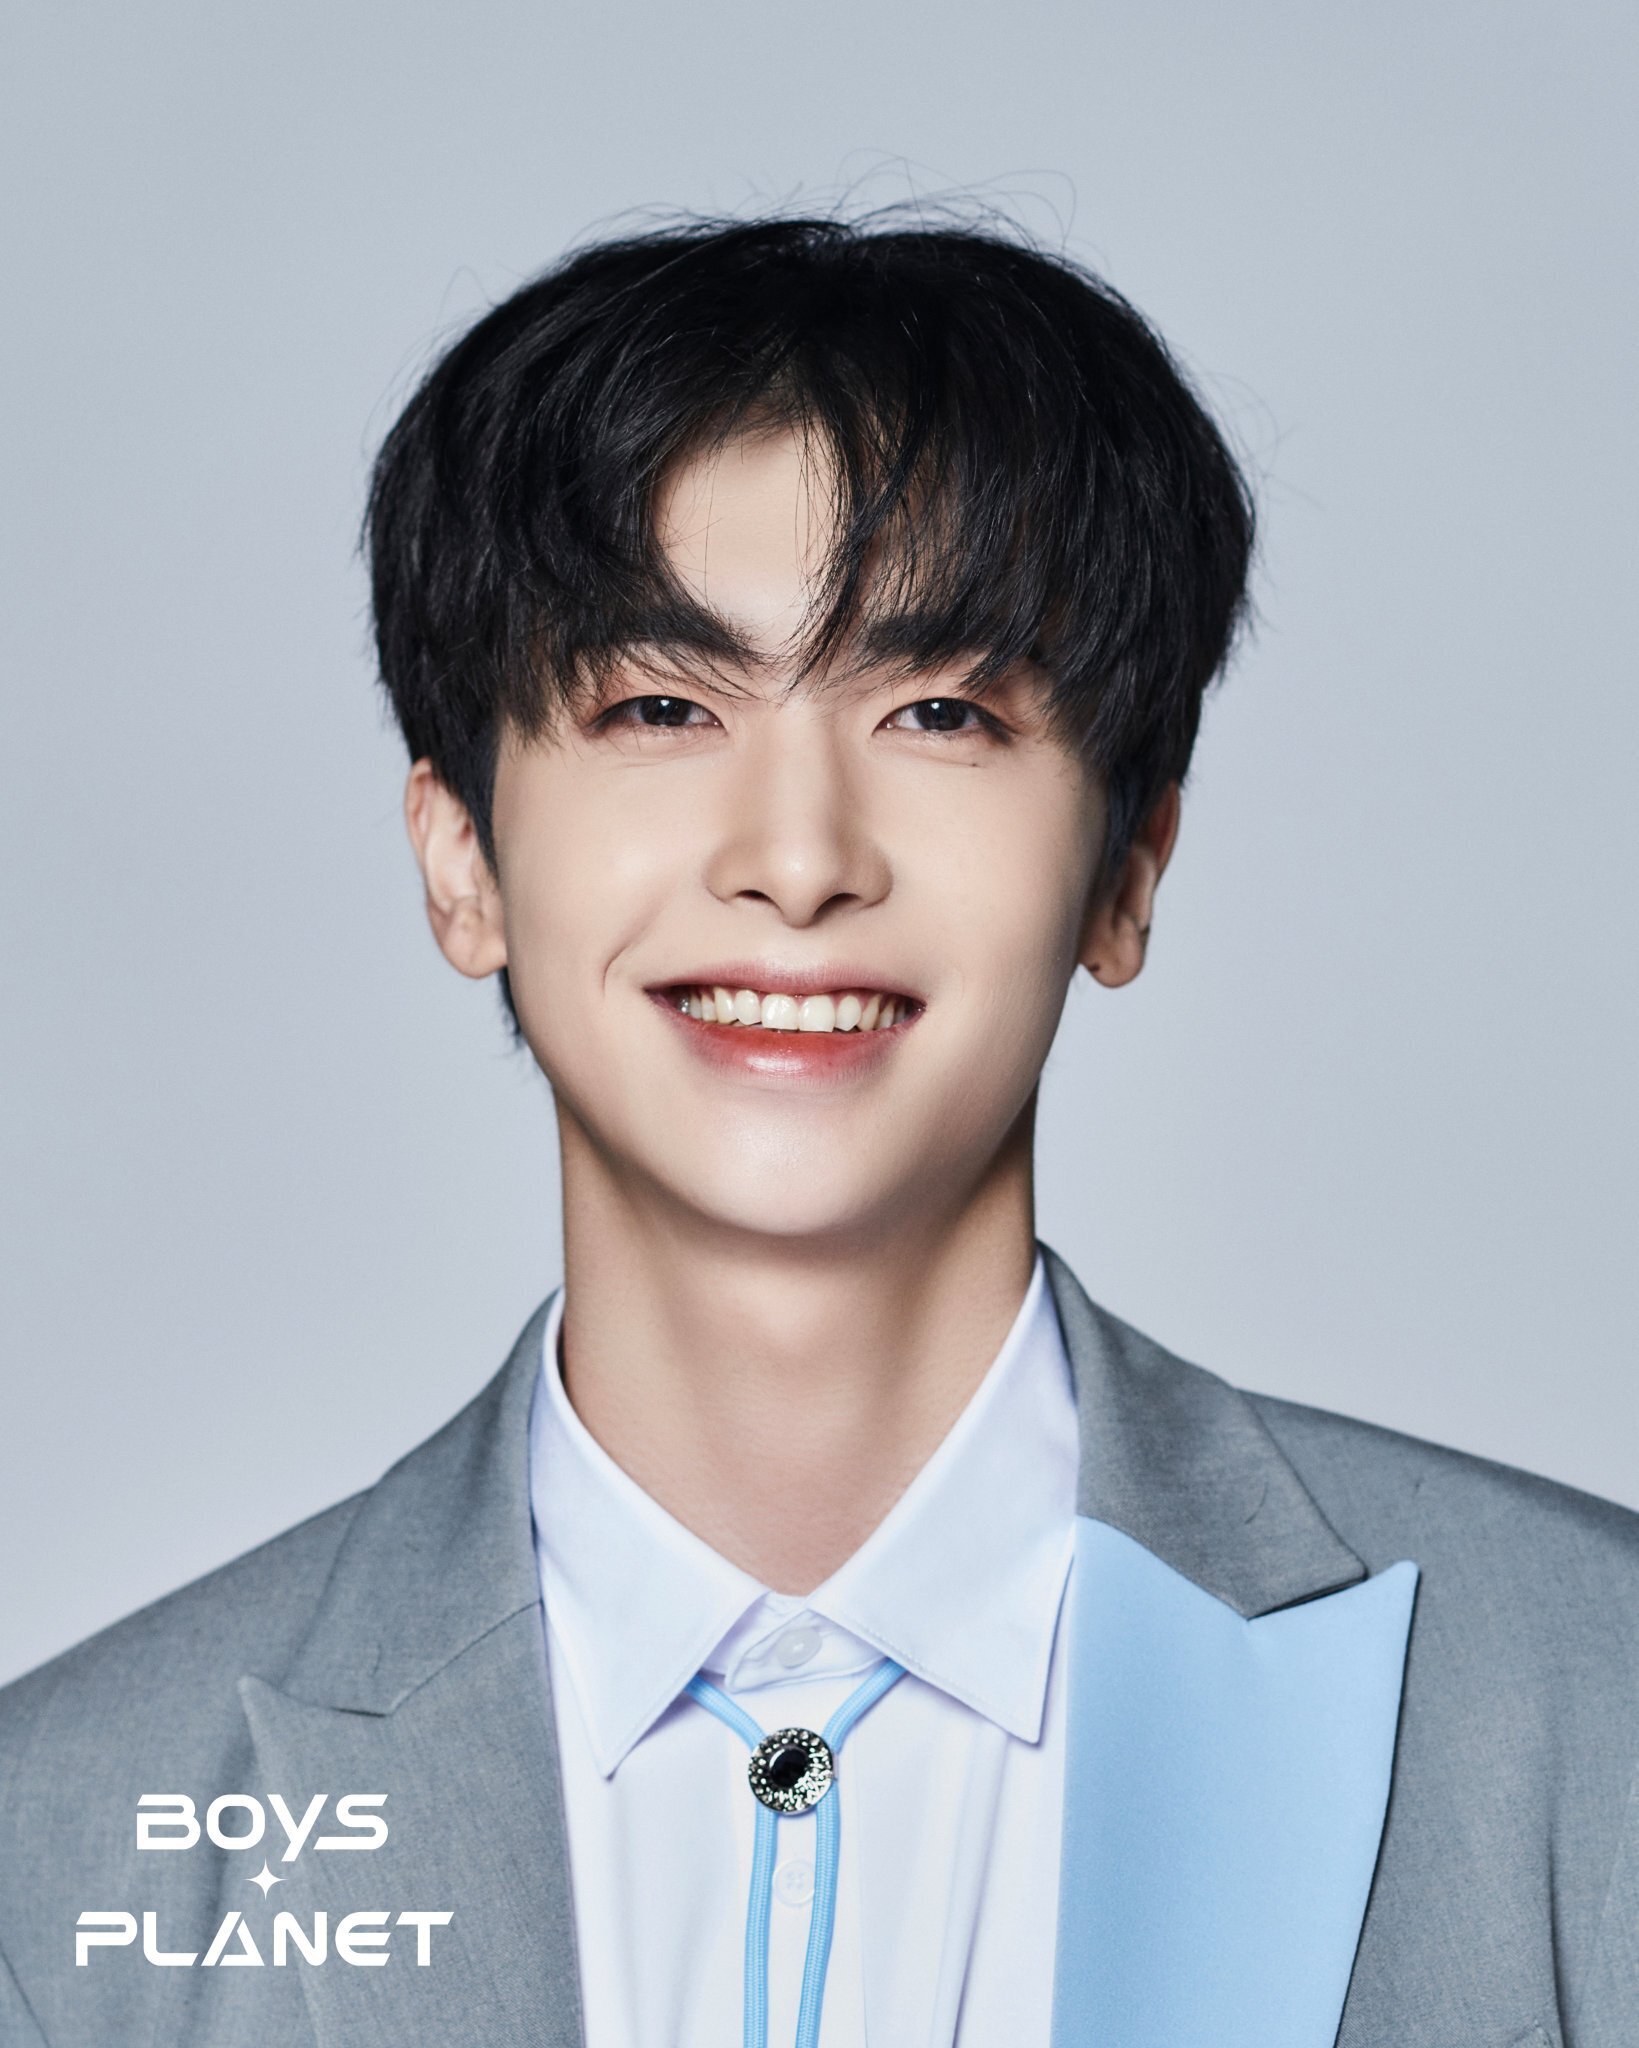 Boys Planet 2023 profile - K group - Xiao | kpopping